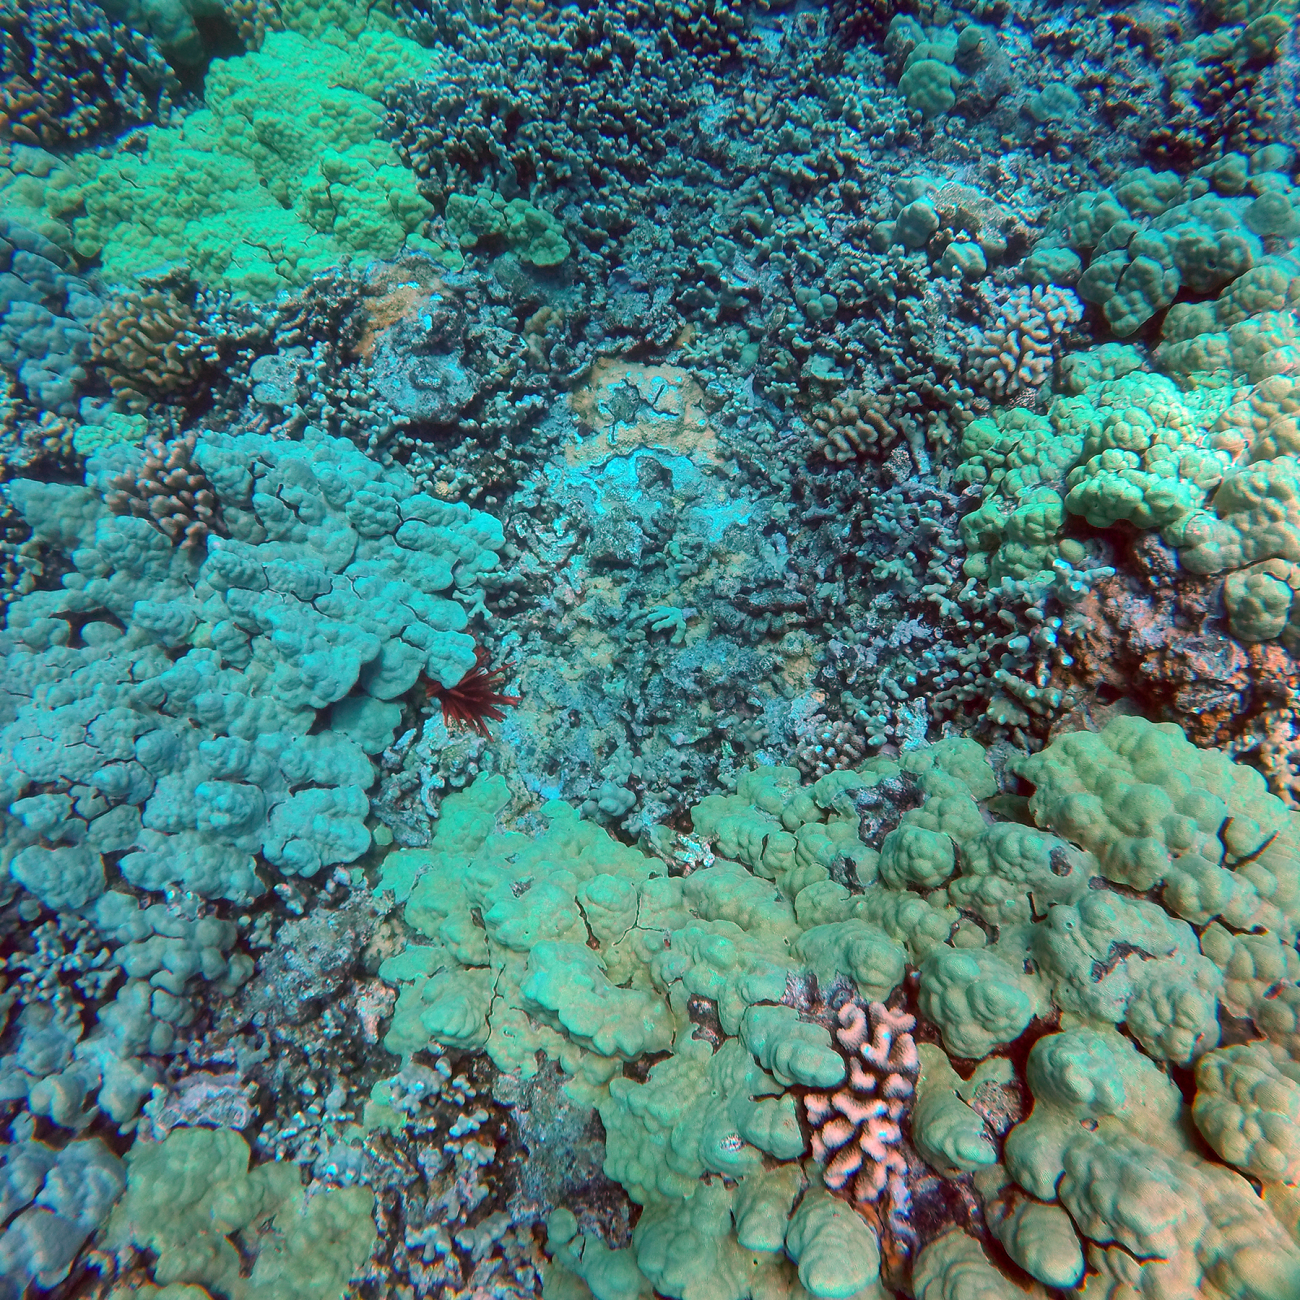 A coral reef typical of those we found off West Hawaii